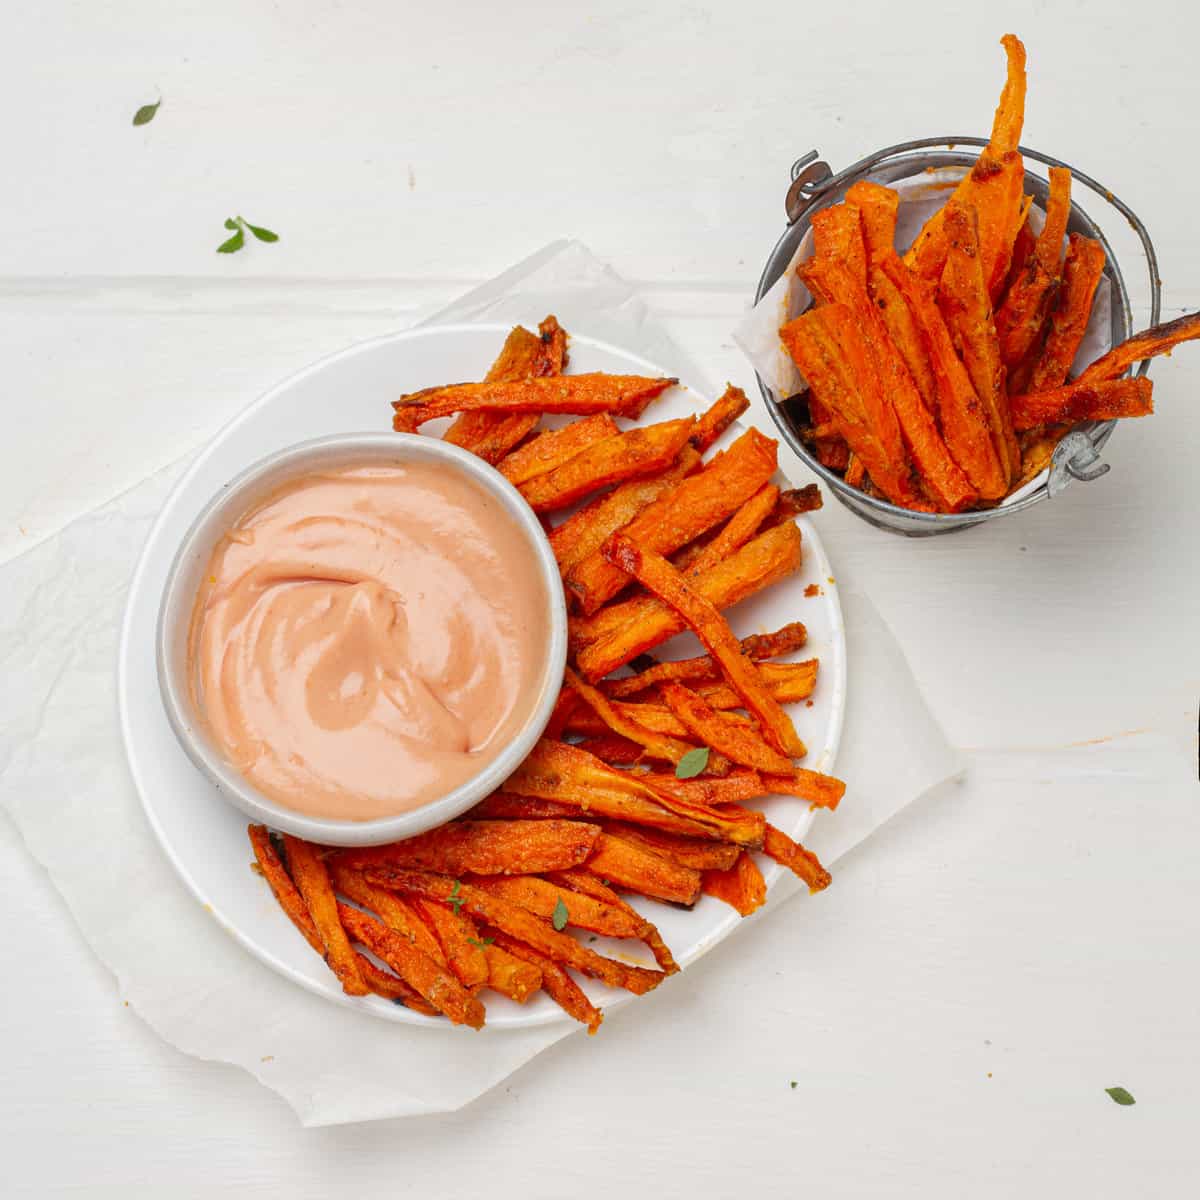 Carrot Fries served with sauce